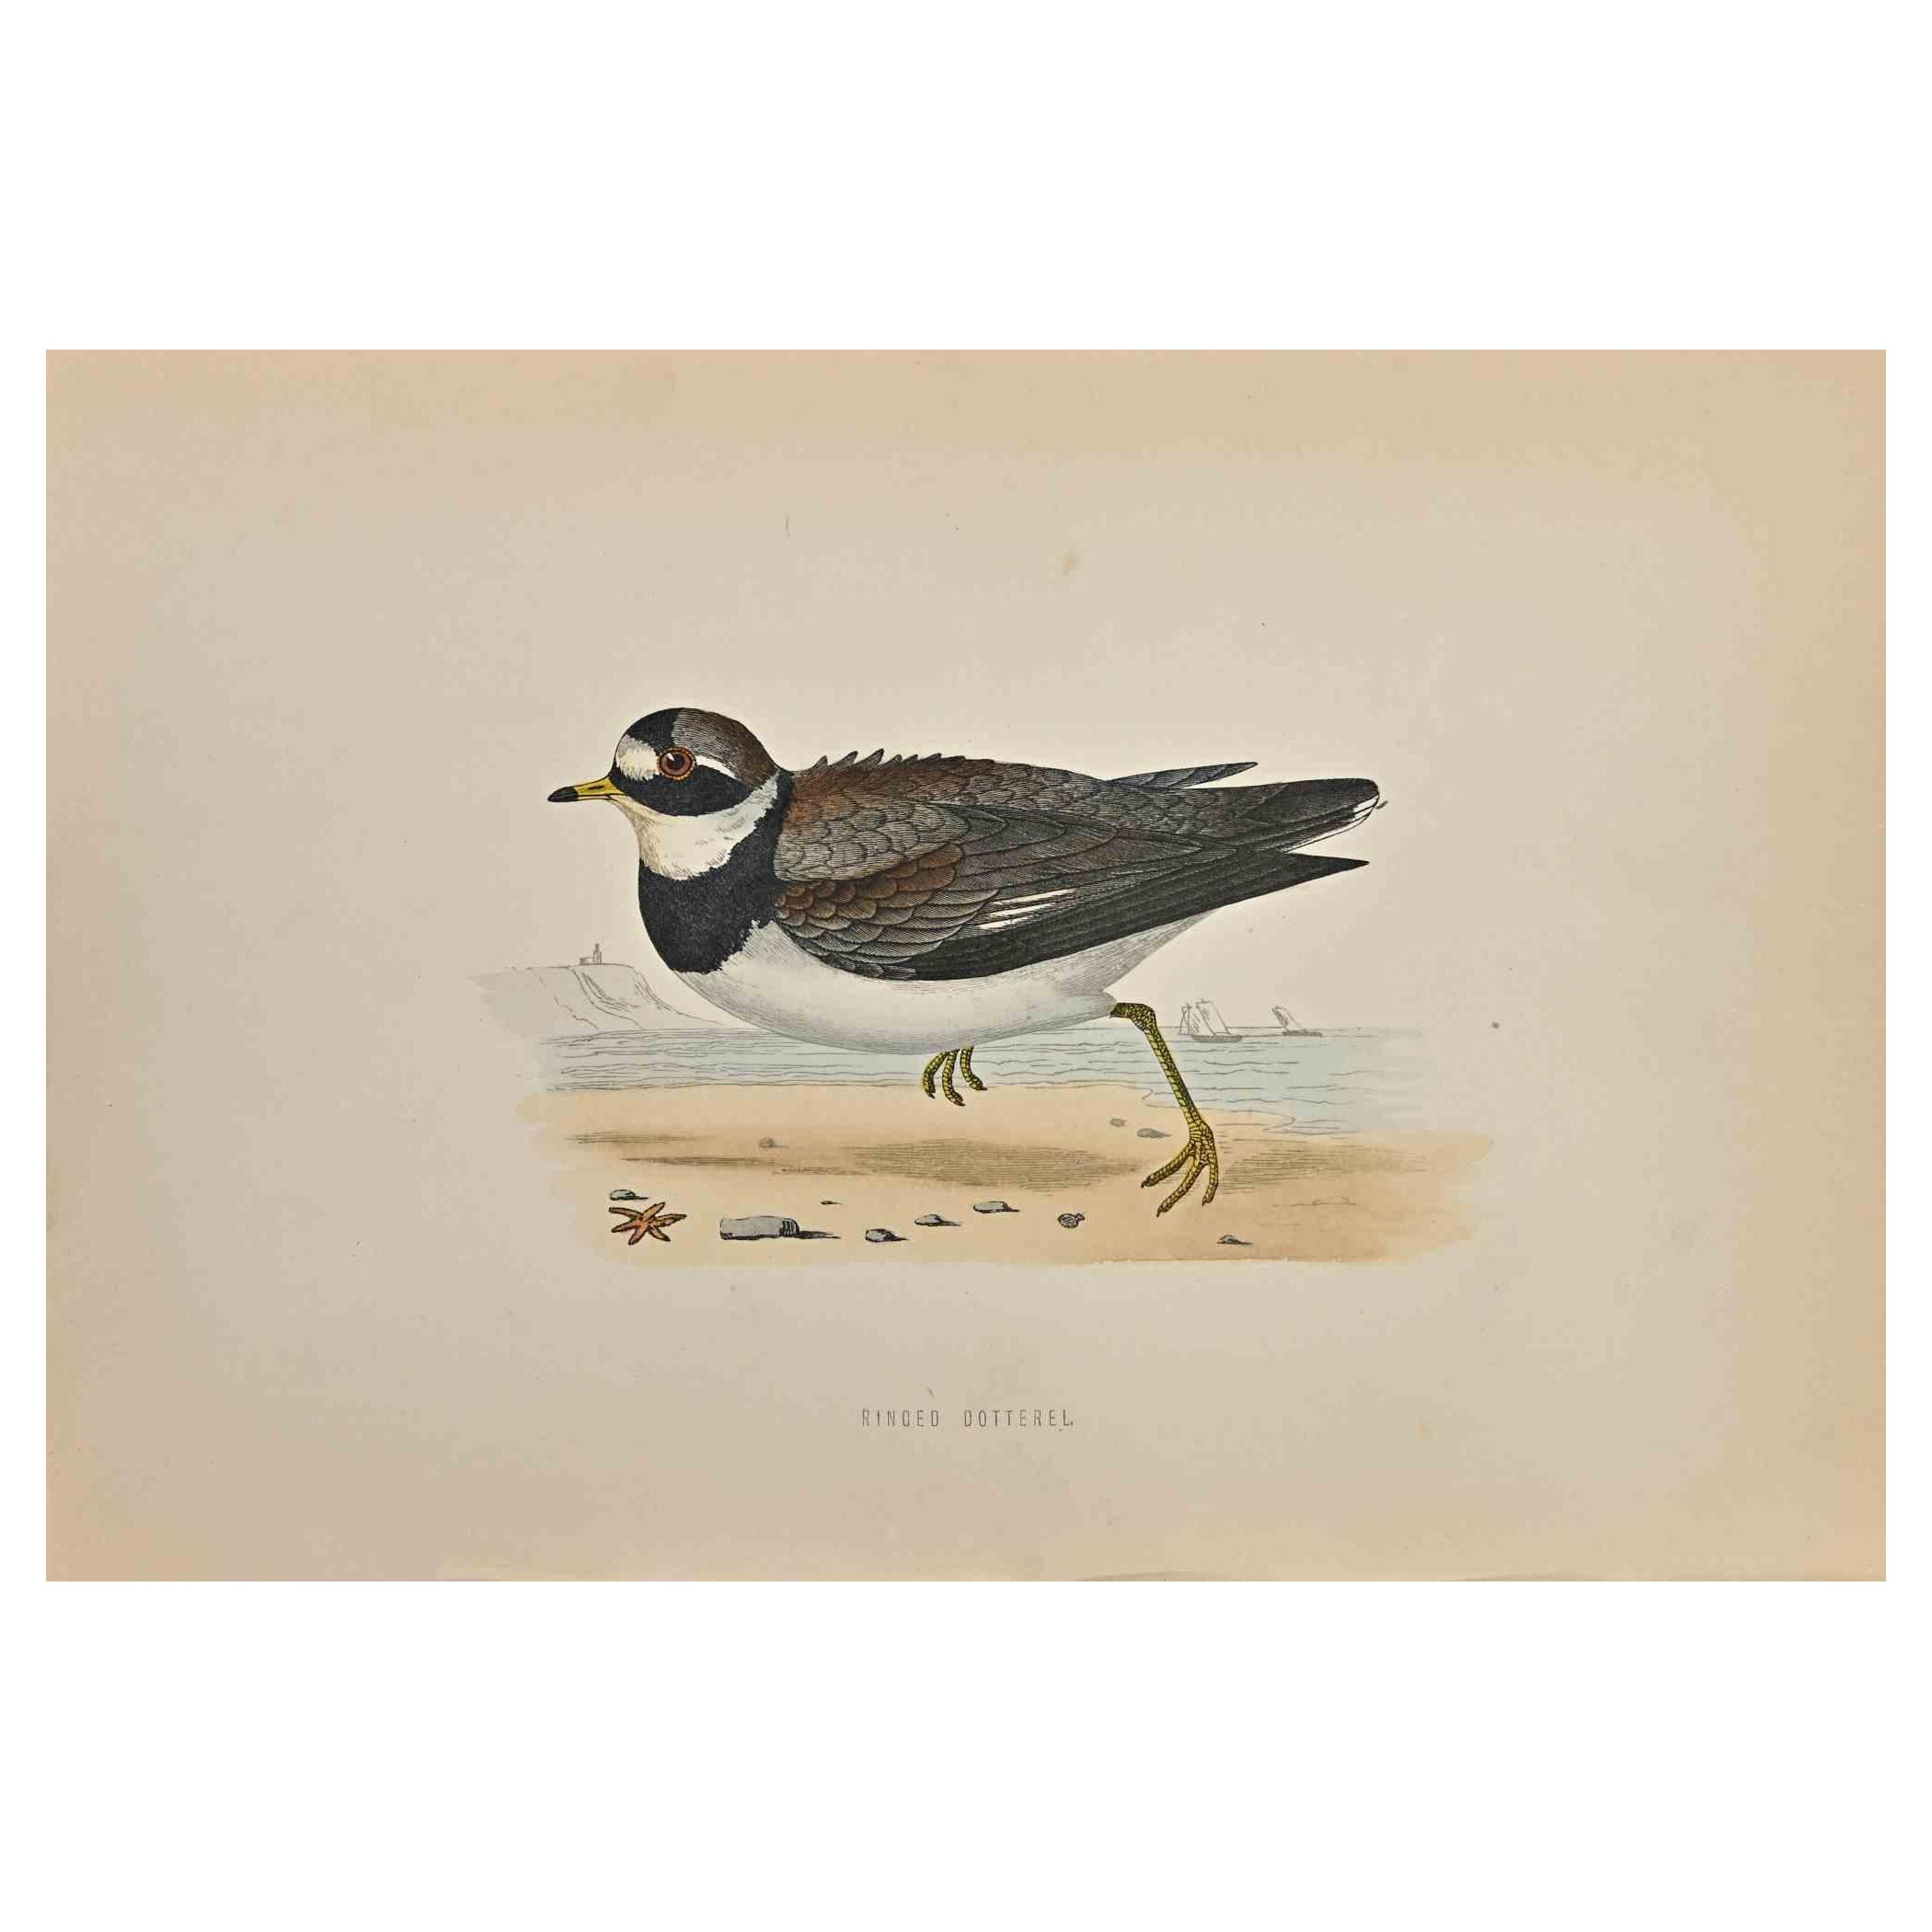 Ringed Dotterel  is a modern artwork realized in 1870 by the British artist Alexander Francis Lydon (1836-1917) . 

Woodcut print, hand colored, published by London, Bell & Sons, 1870.  Name of the bird printed in plate. This work is part of a print